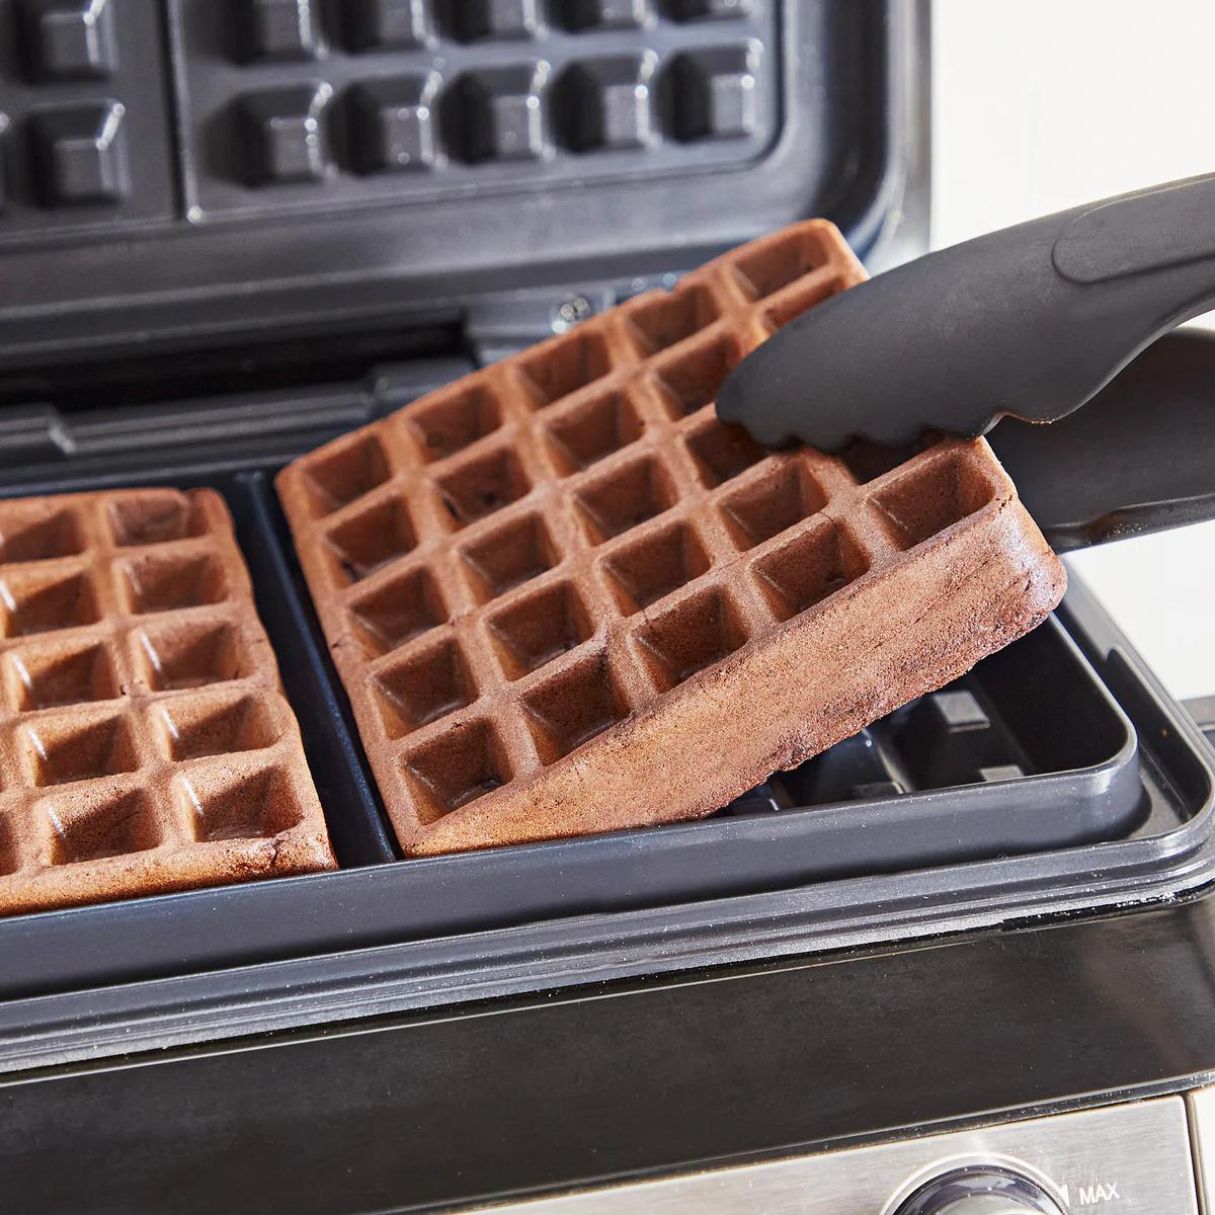 https://storables.com/wp-content/uploads/2023/08/13-incredible-ceramic-waffle-iron-for-2023-1692262380.jpg